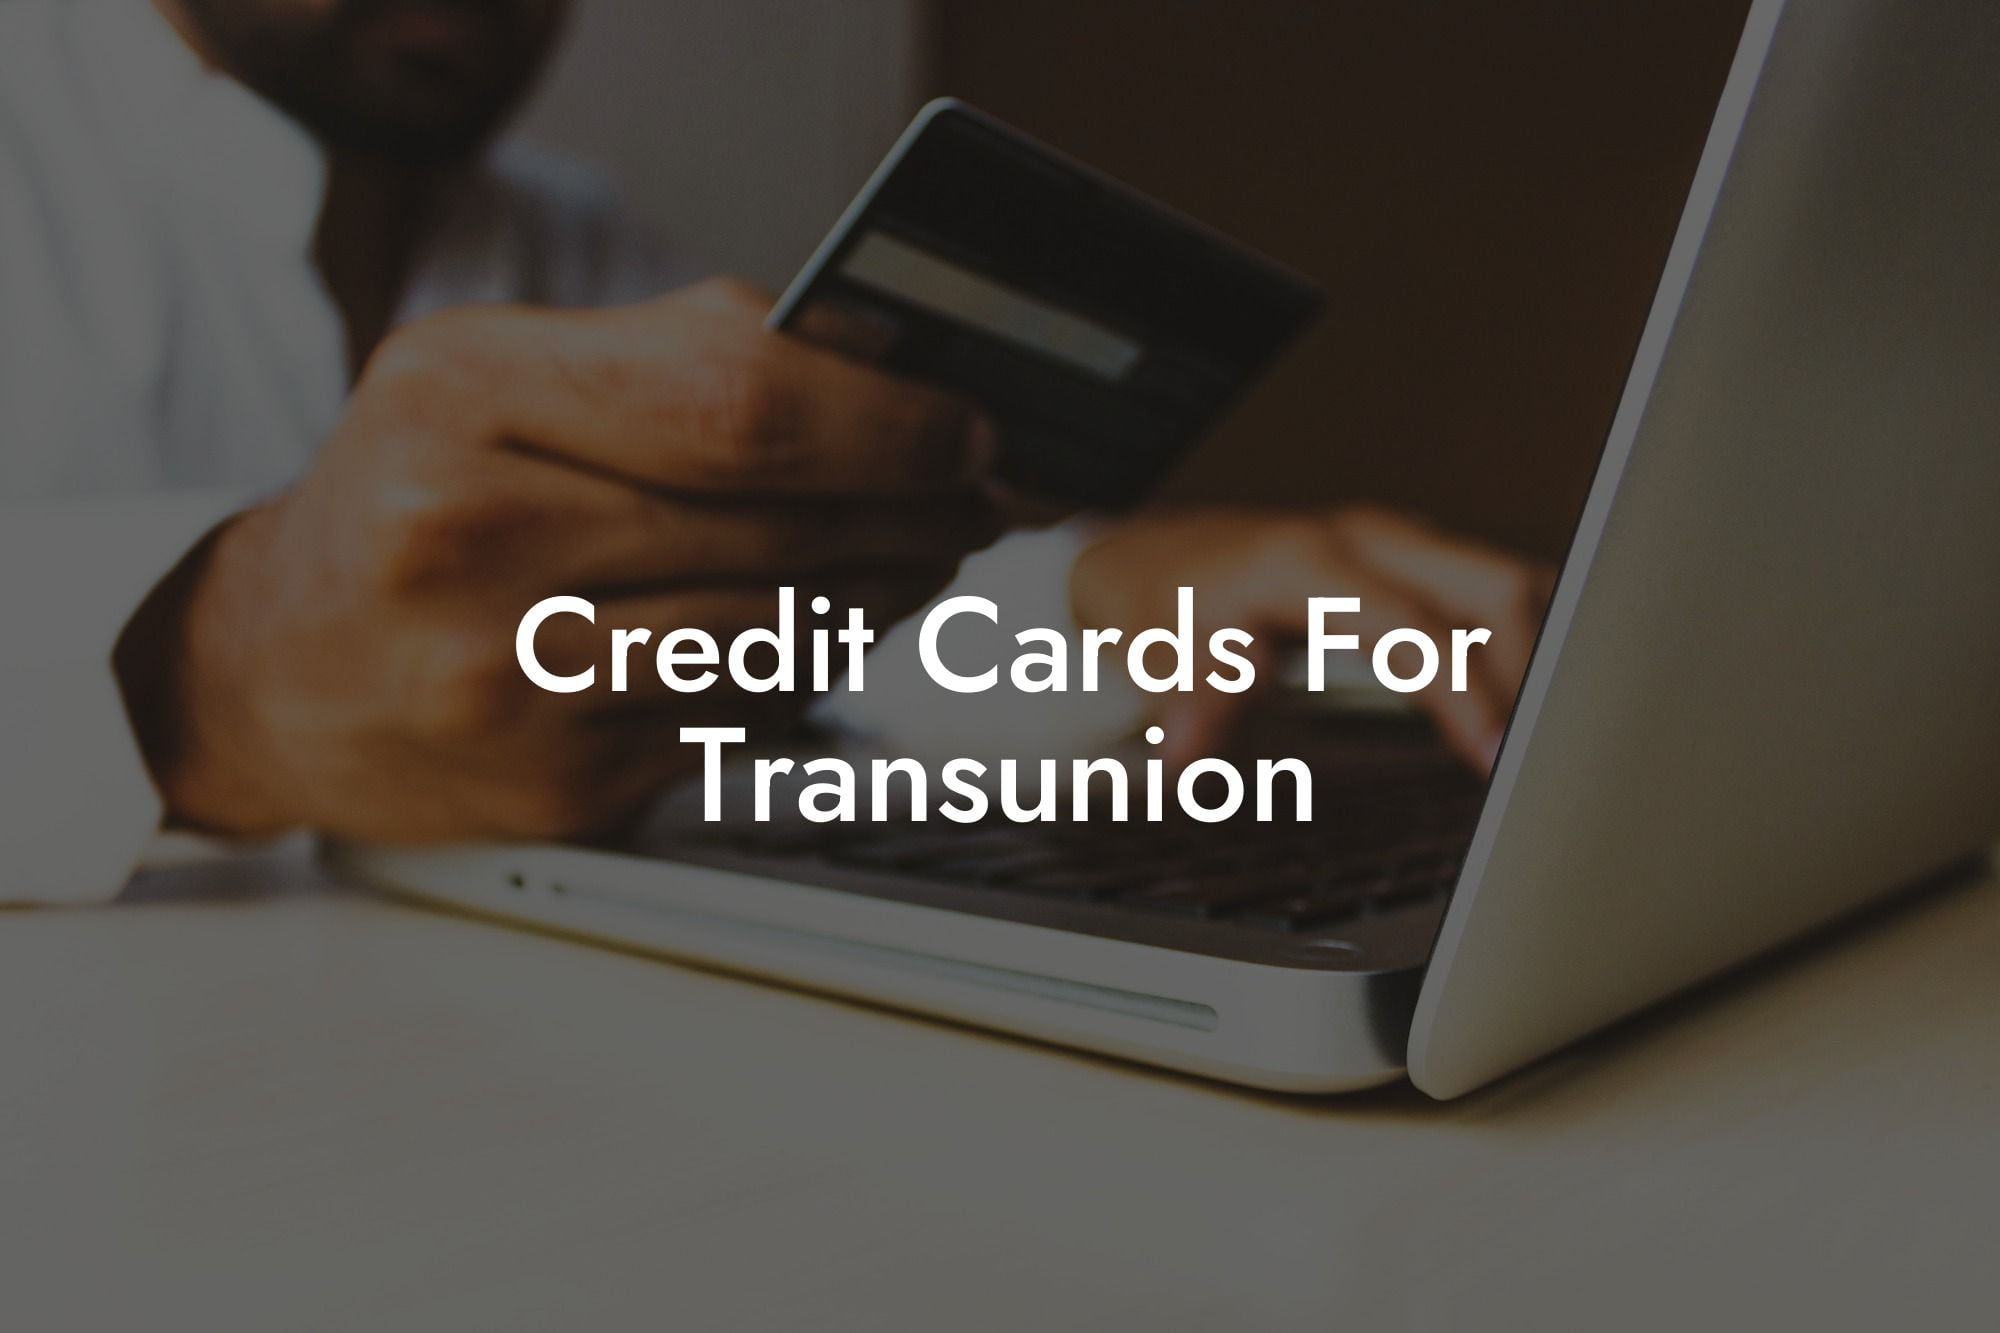 Credit Cards For Transunion